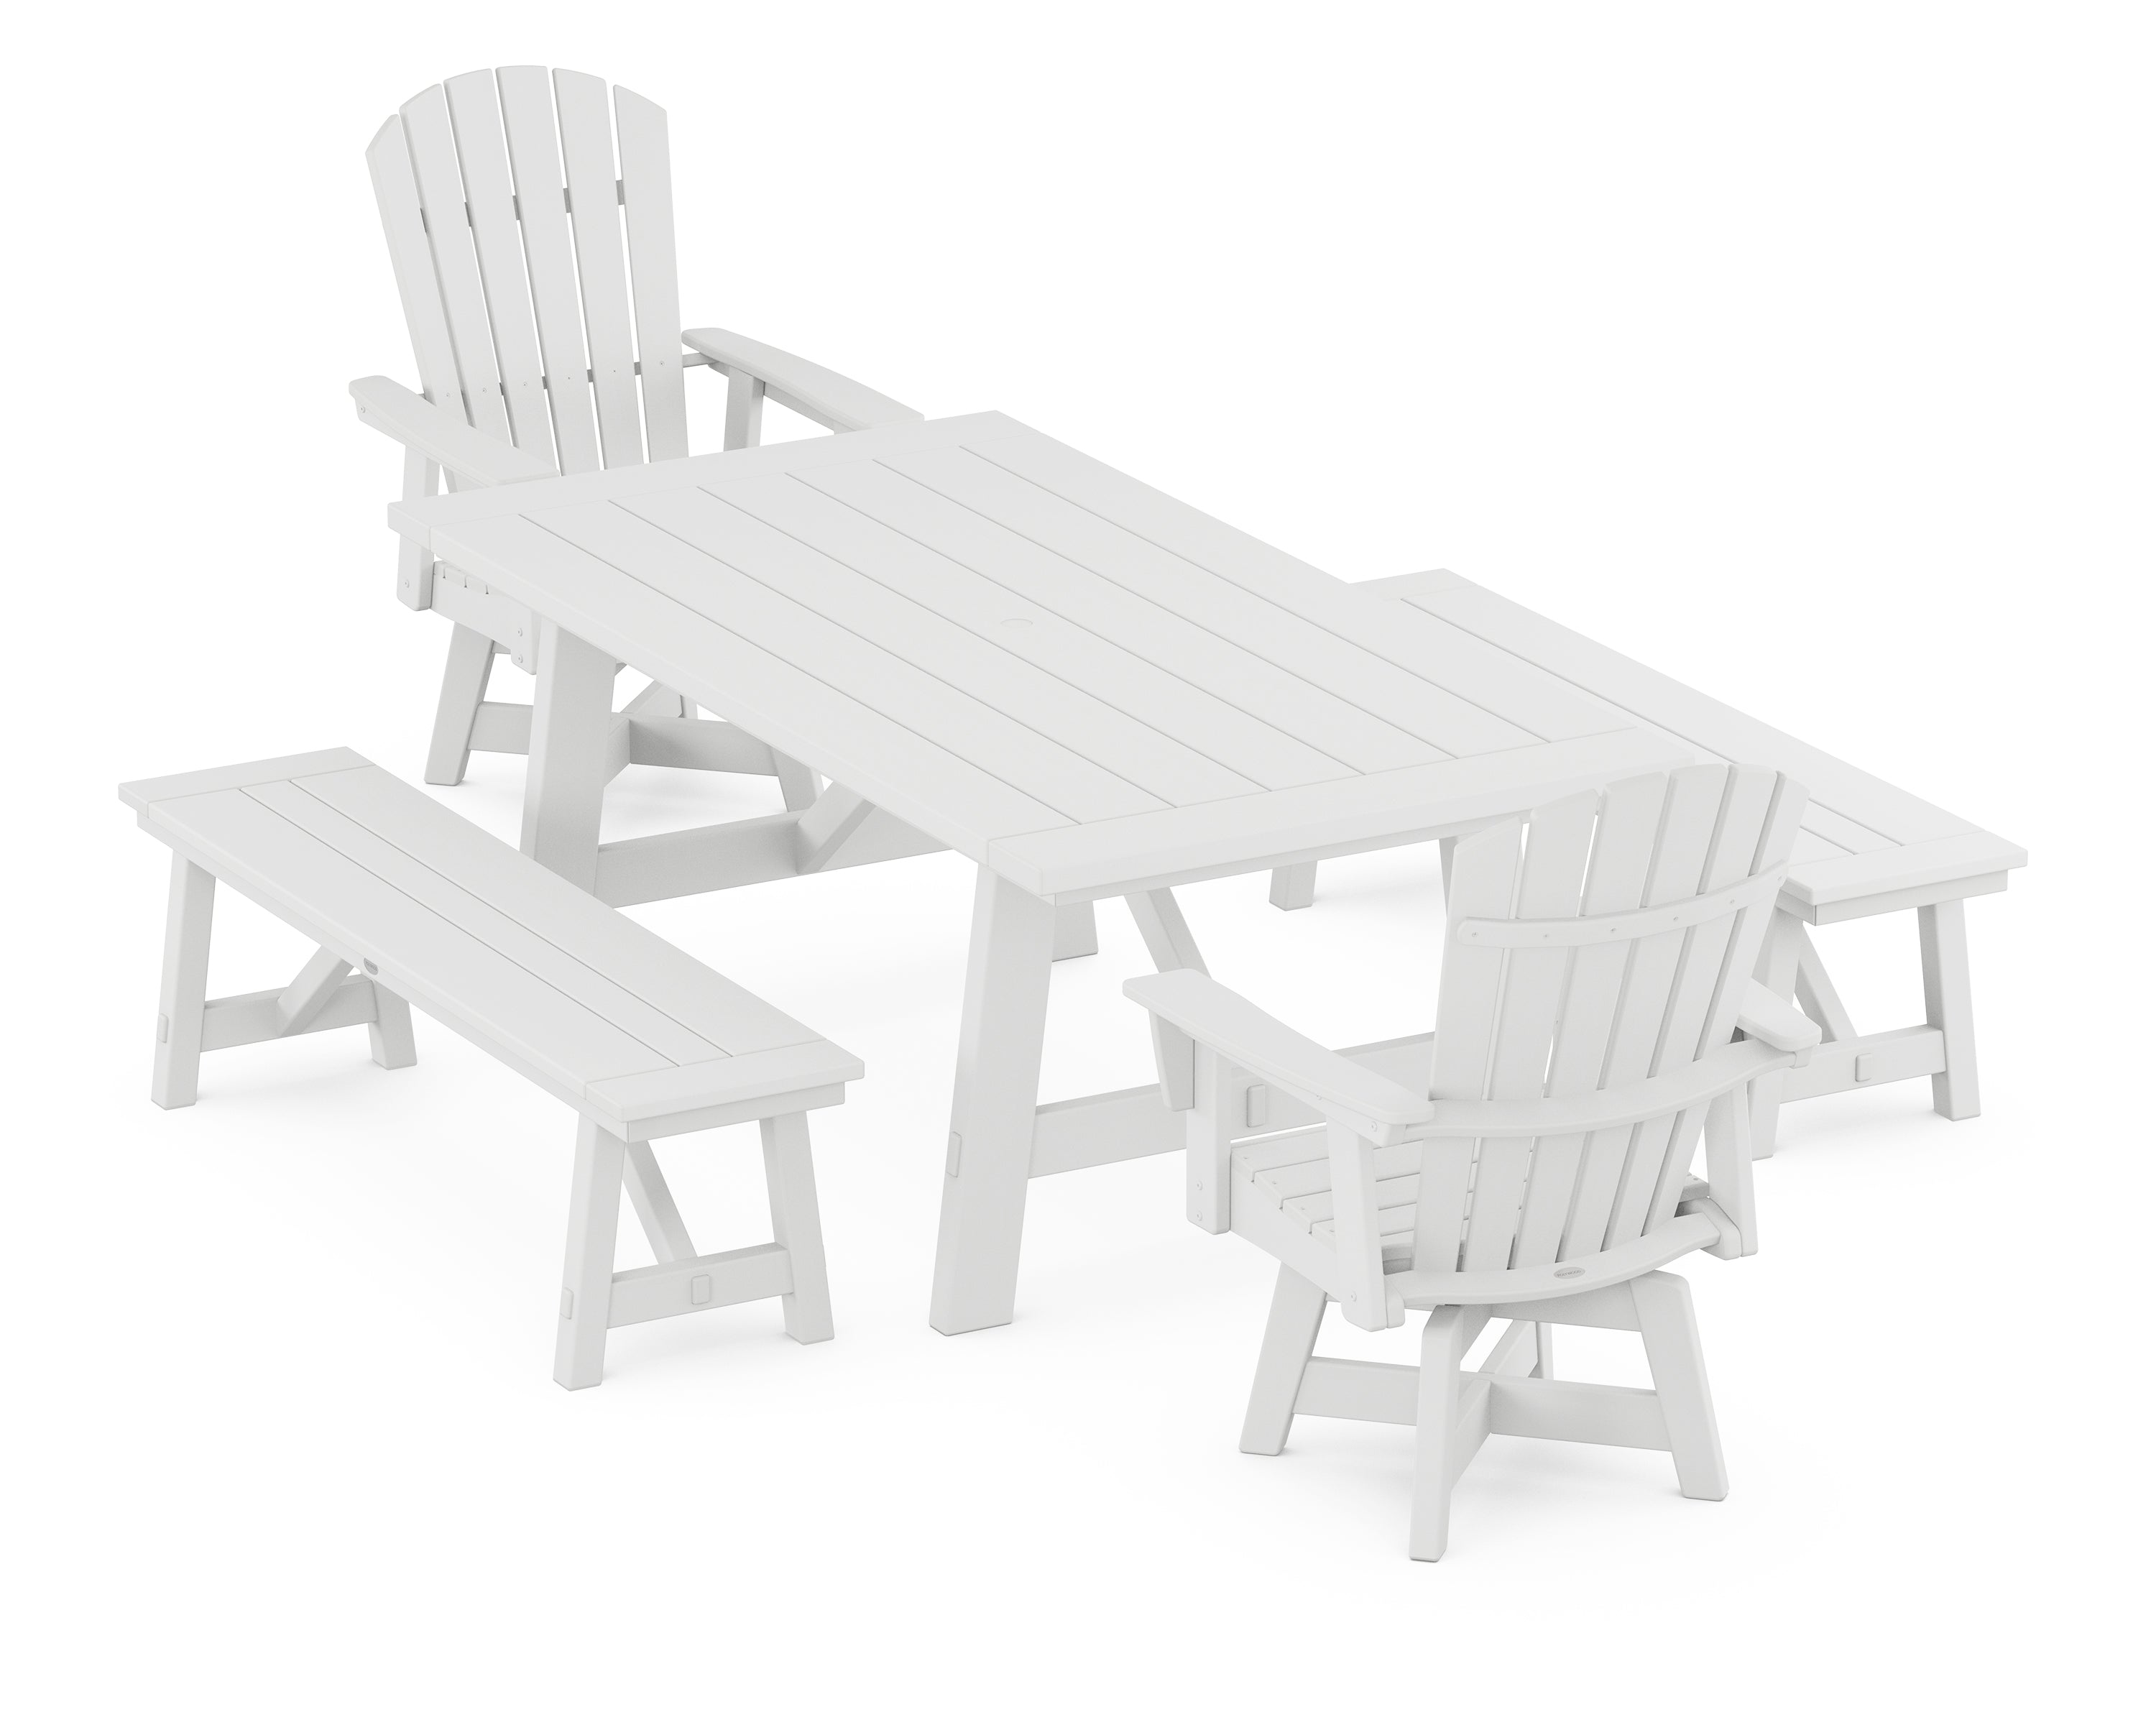 POLYWOOD® Nautical Curveback Adirondack Swivel Chair 5-Piece Rustic Farmhouse Dining Set With Benches in White